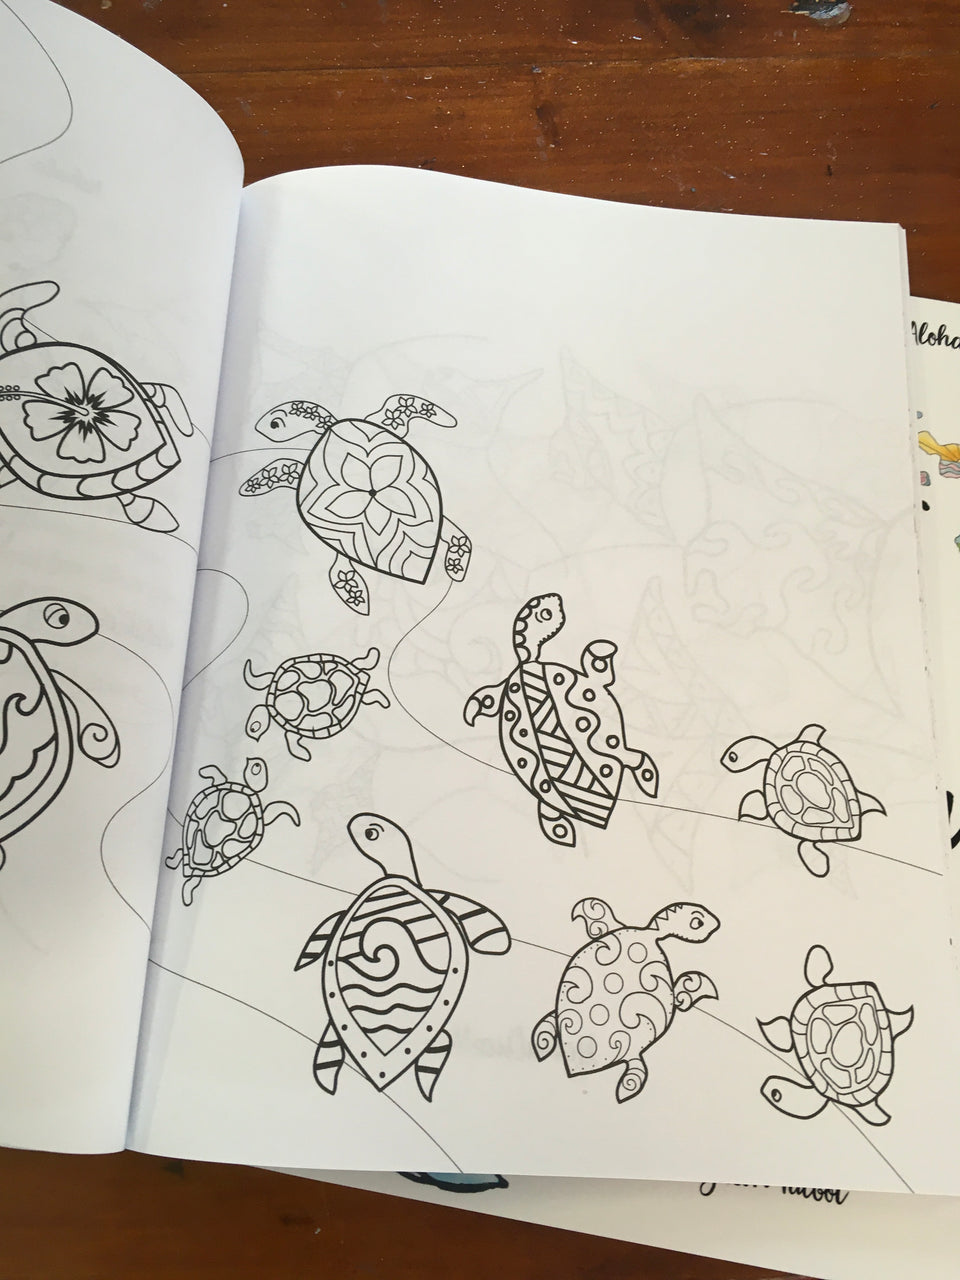 turtles inside pages of coloring book as examples 